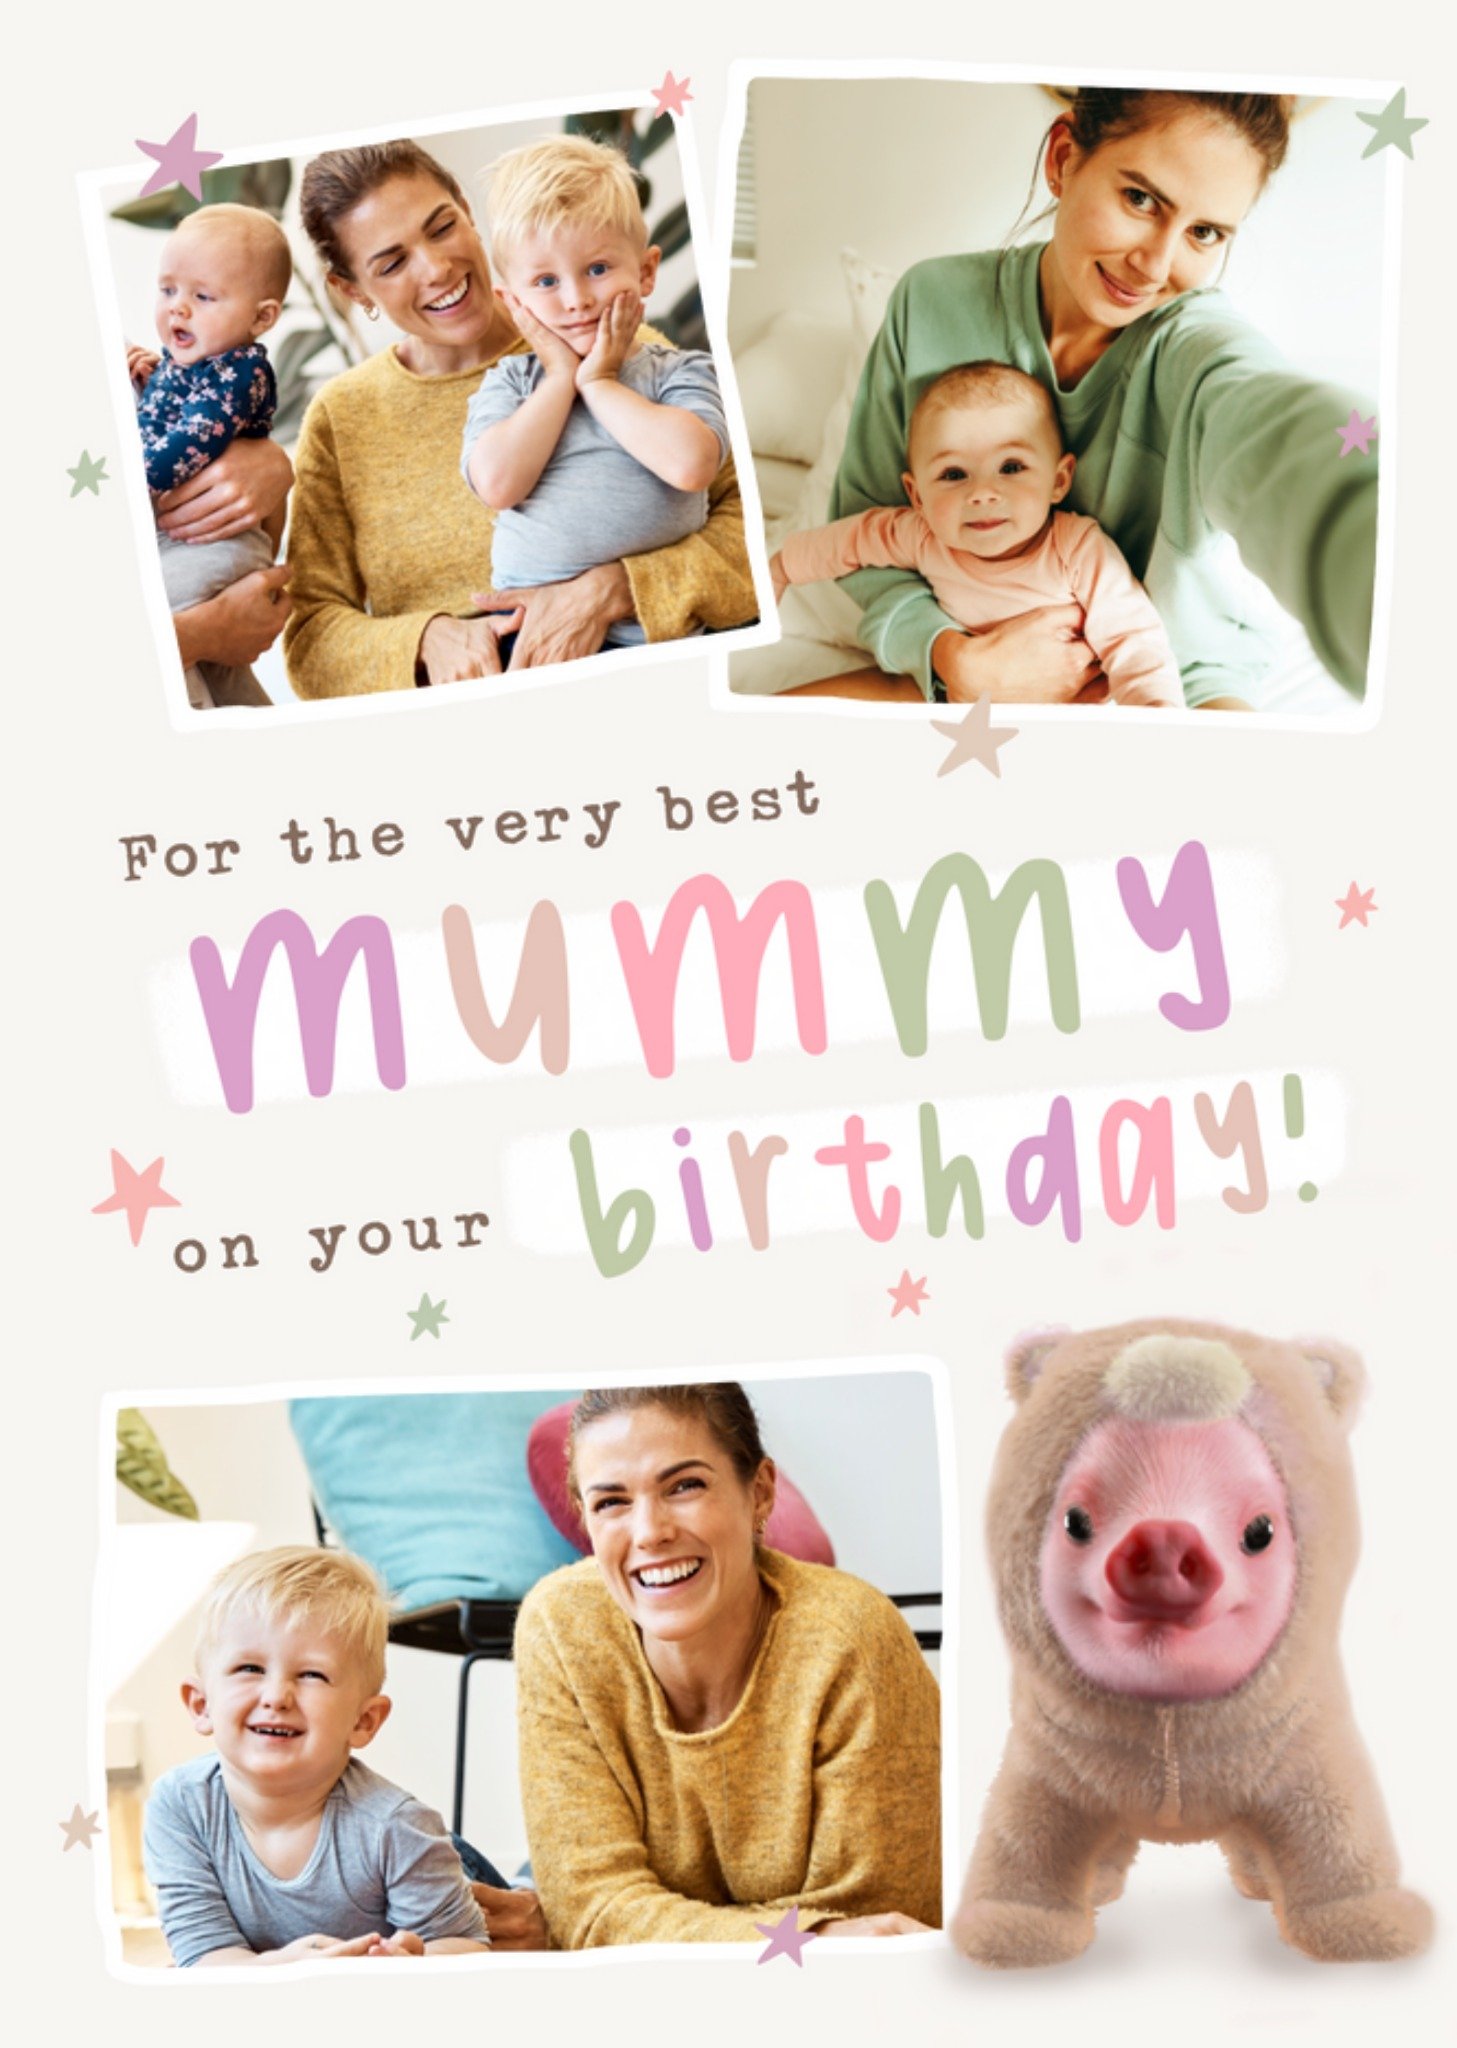 Moonpig Exclusive Sweet For The Very Best Mummy Moonpig Photo Upload Birthday Card, Large